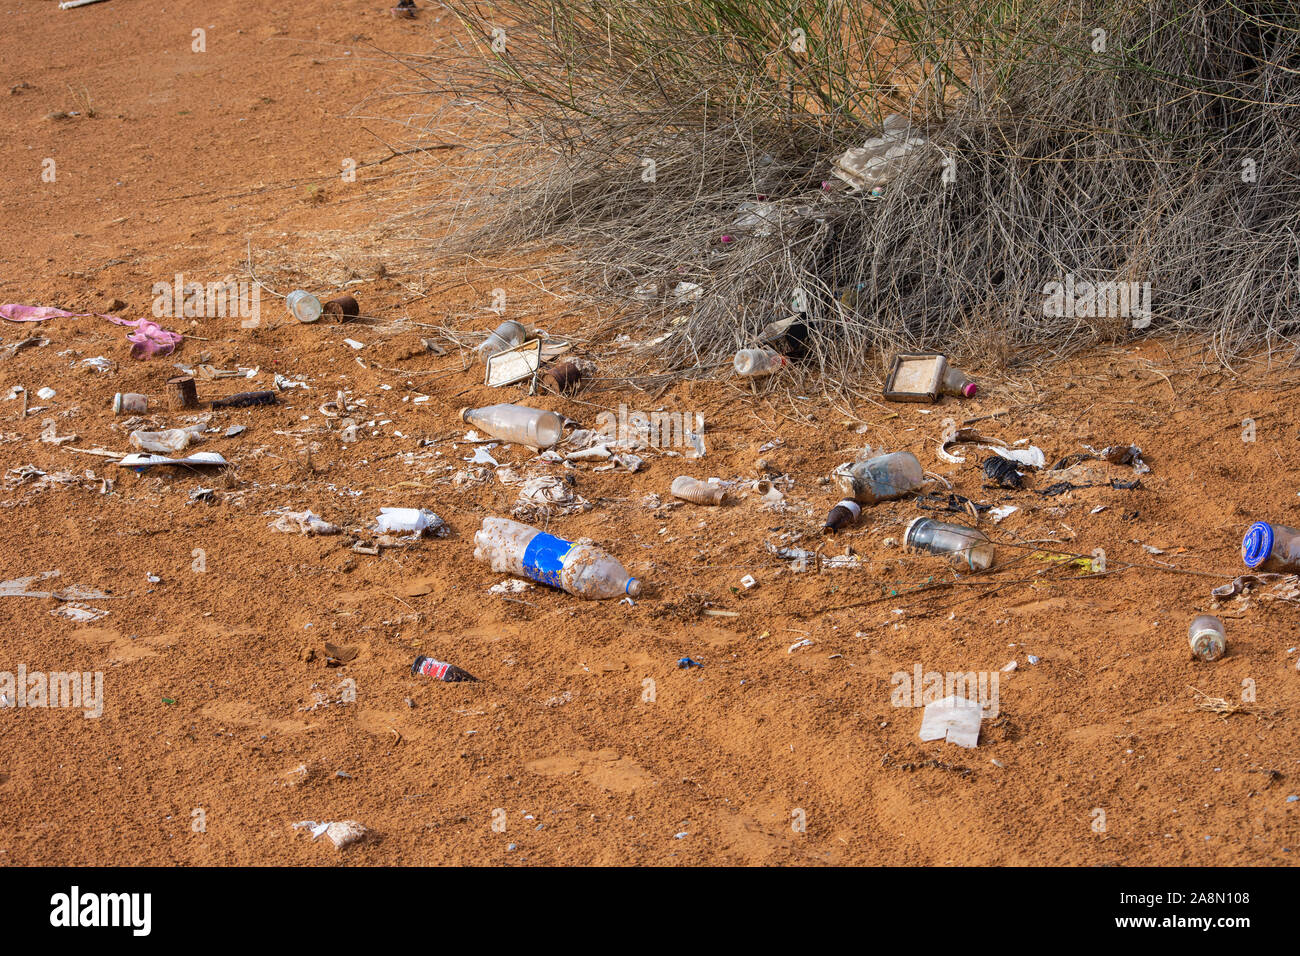 Plastic pollution in the desert sand. Need for awareness of enviornmental protection, recycling, and protecting the world. Environmental concept. Stock Photo